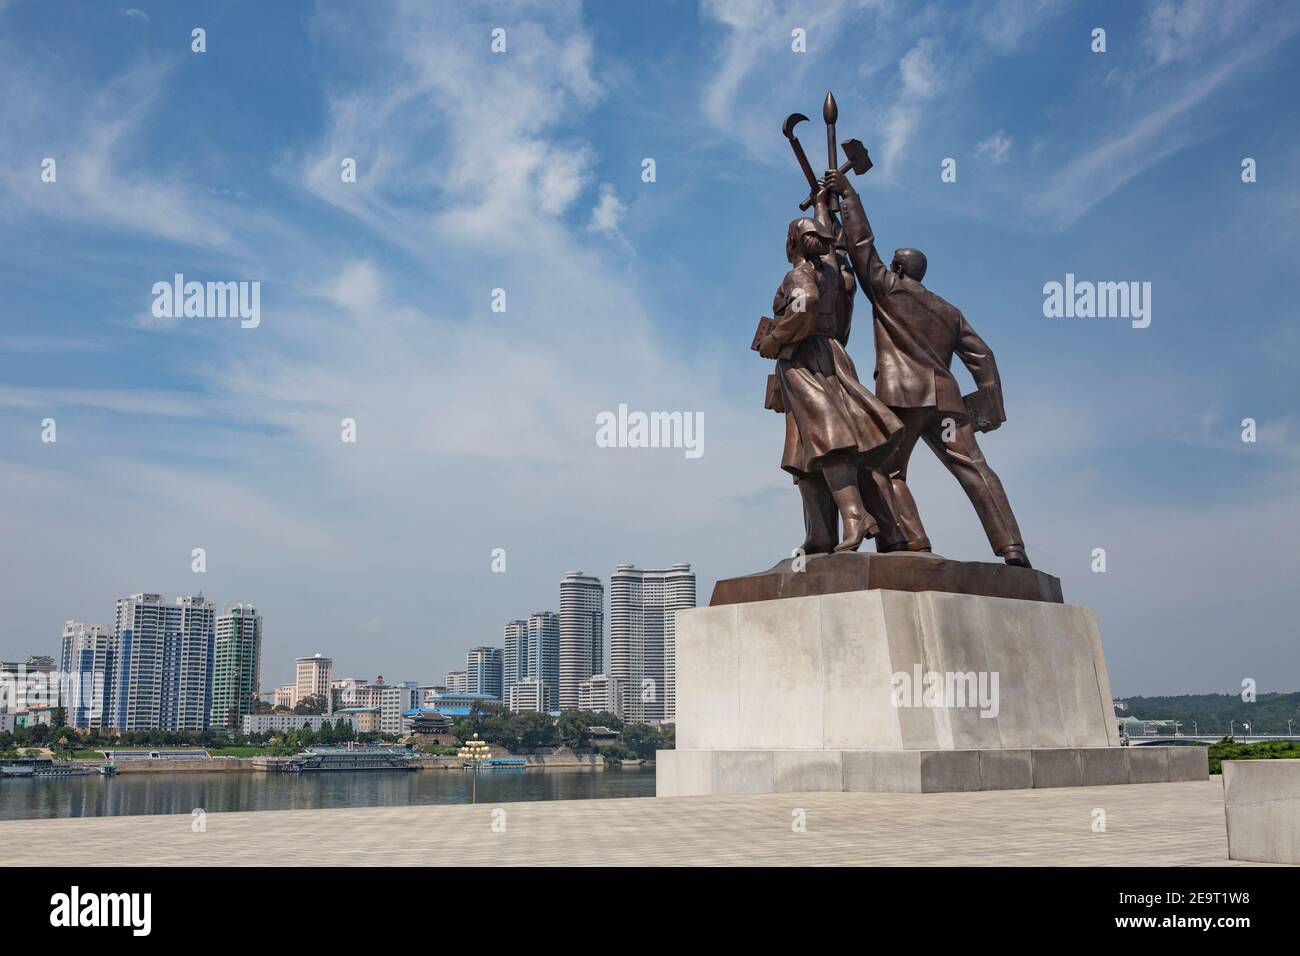 Monument in a public square in the capital city of North Korea Stock Photo